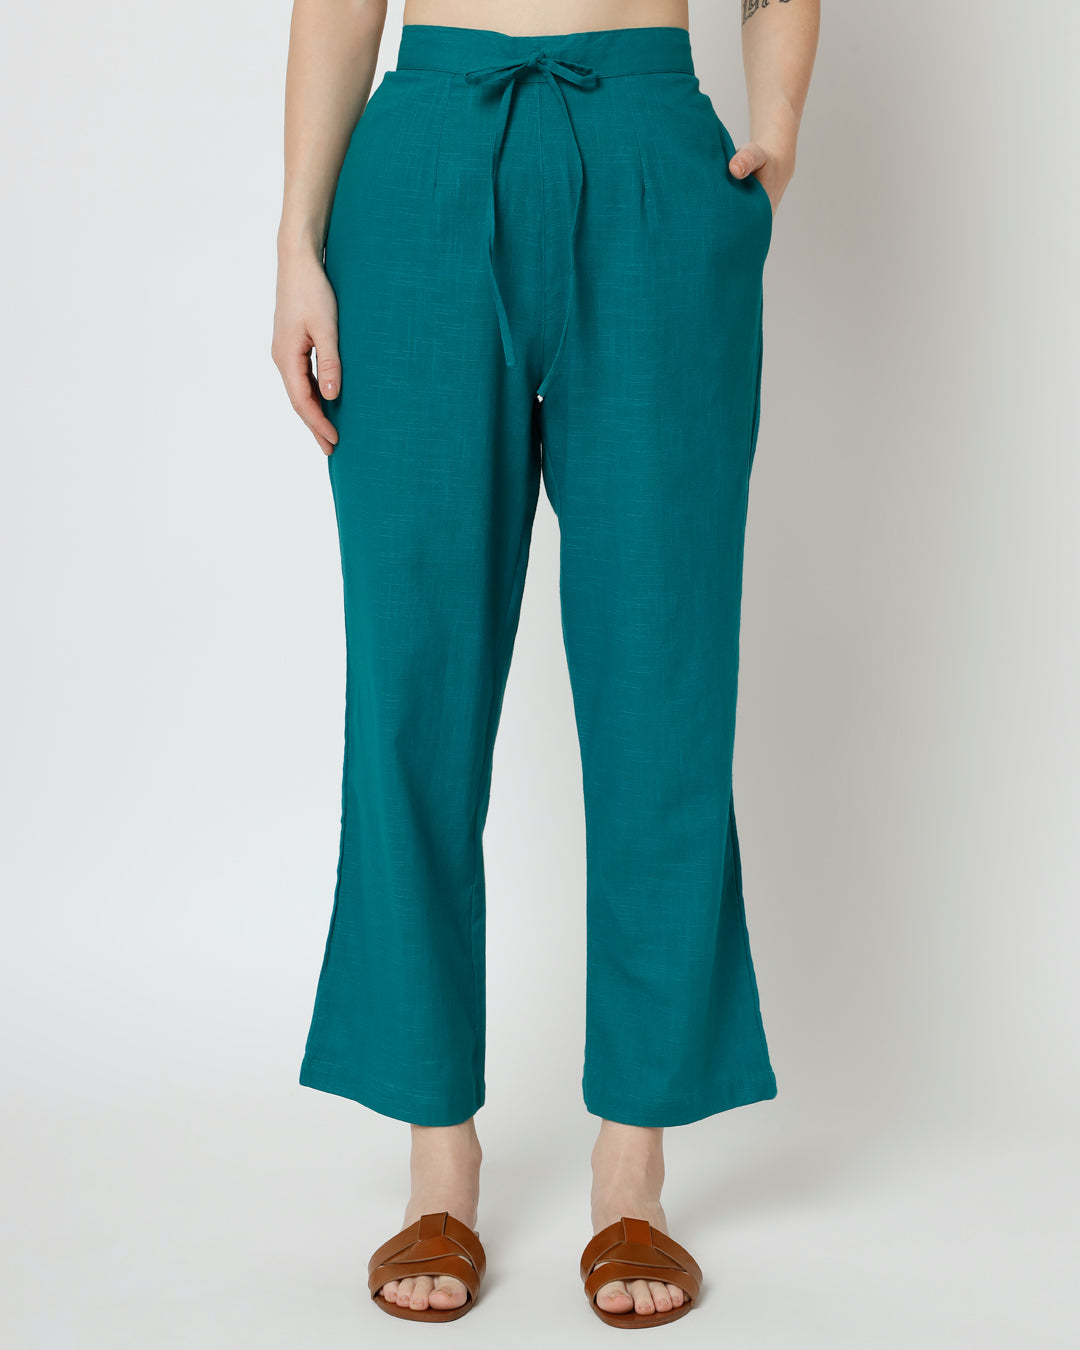 Combo: Deep Teal & Forest Green Straight Pants- Set of 2